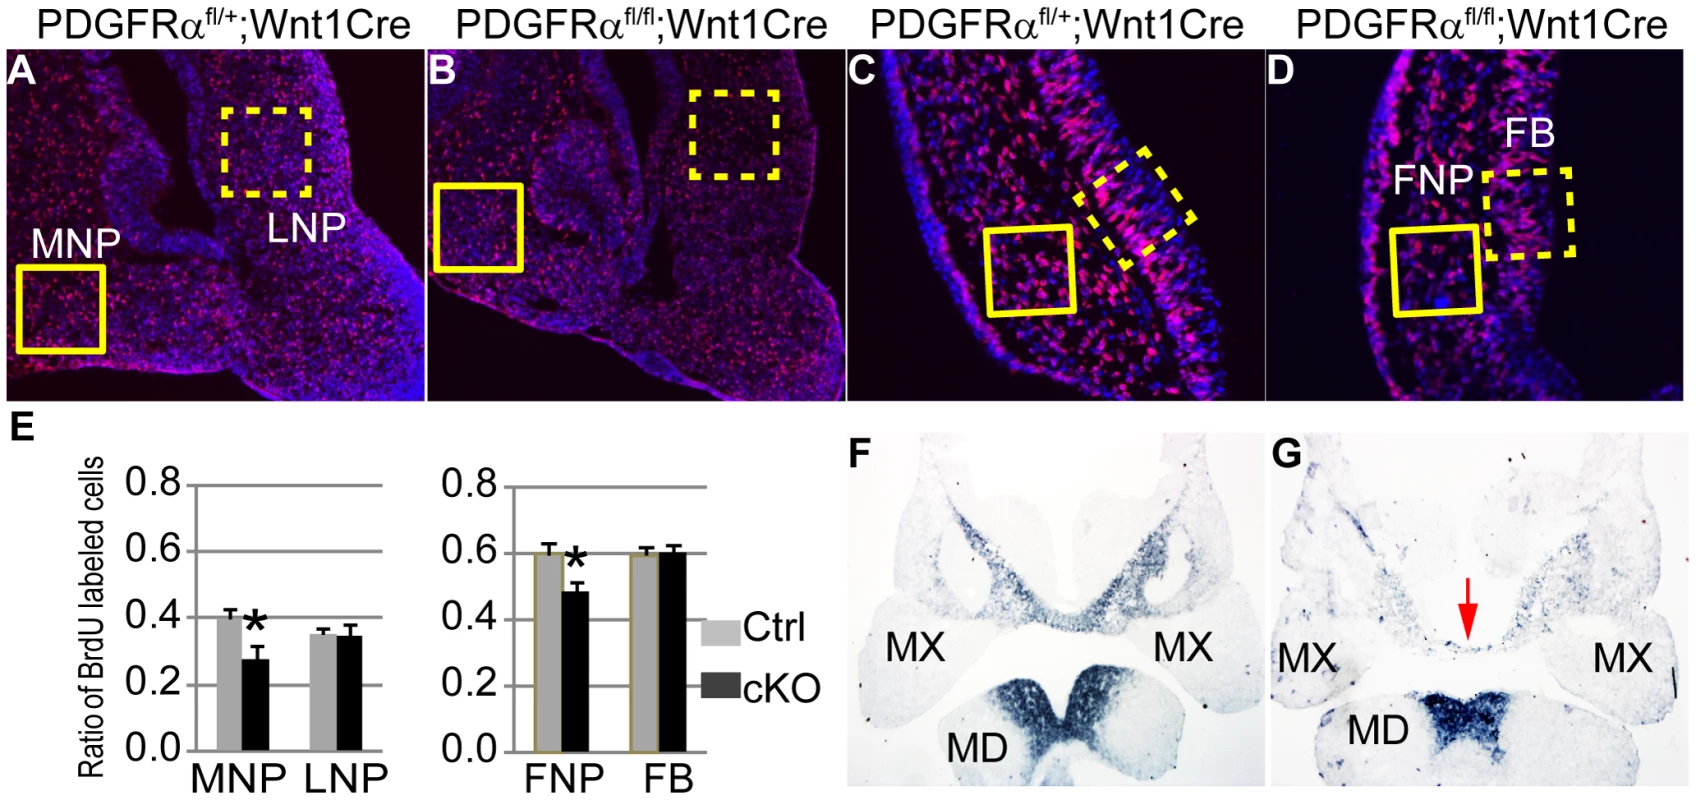 PDGFRα is essential to maintain cell proliferation and gene expression of MNP.